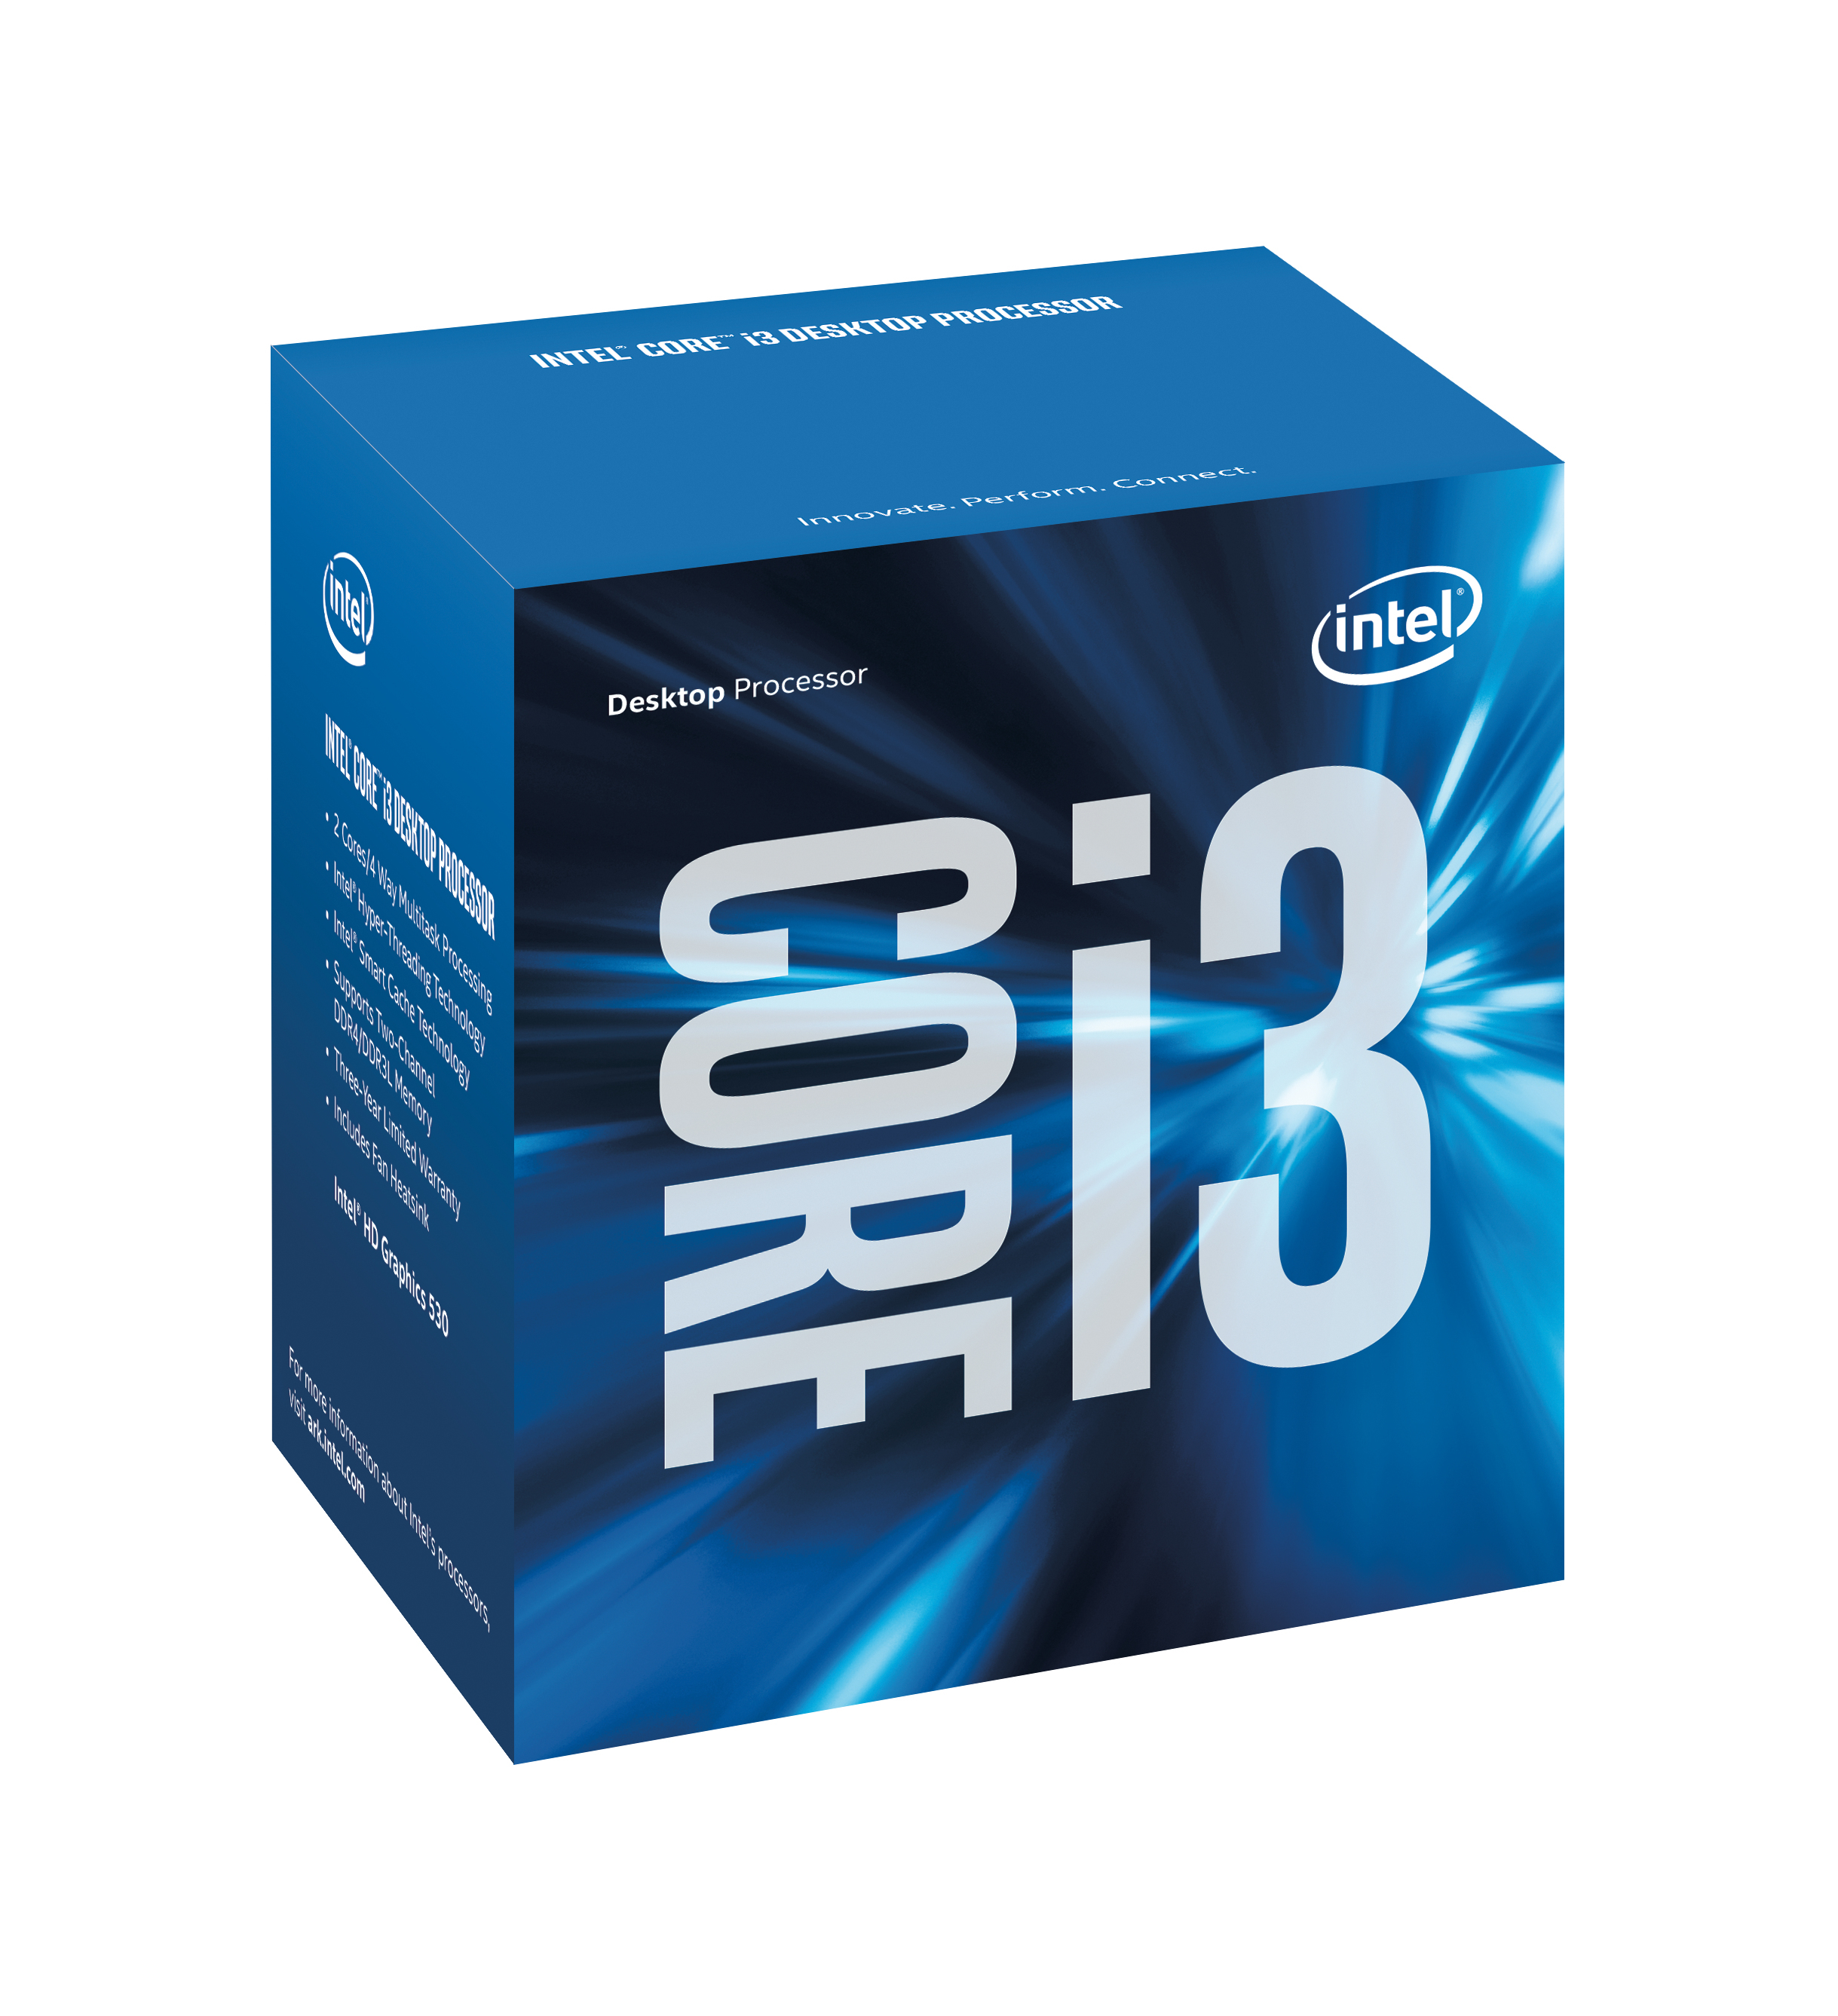 Intel Core i3-6100, 2C/4T, 3,7 GHz, 3 MB, 51 W, S1151, HD Graphics 530, 350/1050,- TWEEDEHANDS pulled